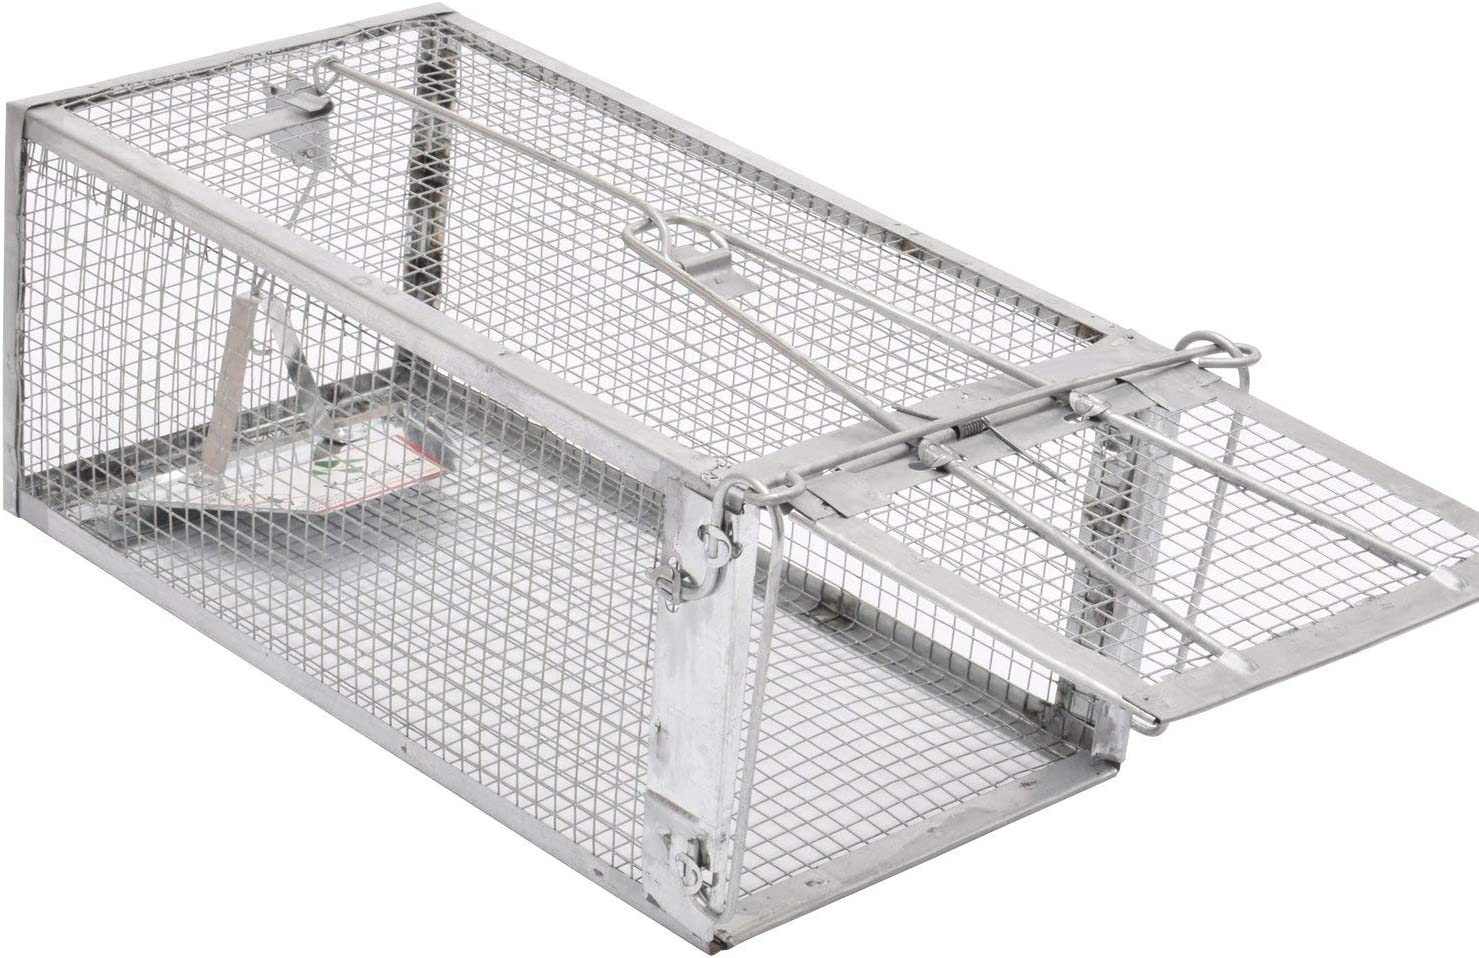 Kensizer Animal Humane Live Cage Trap That Work for [...]